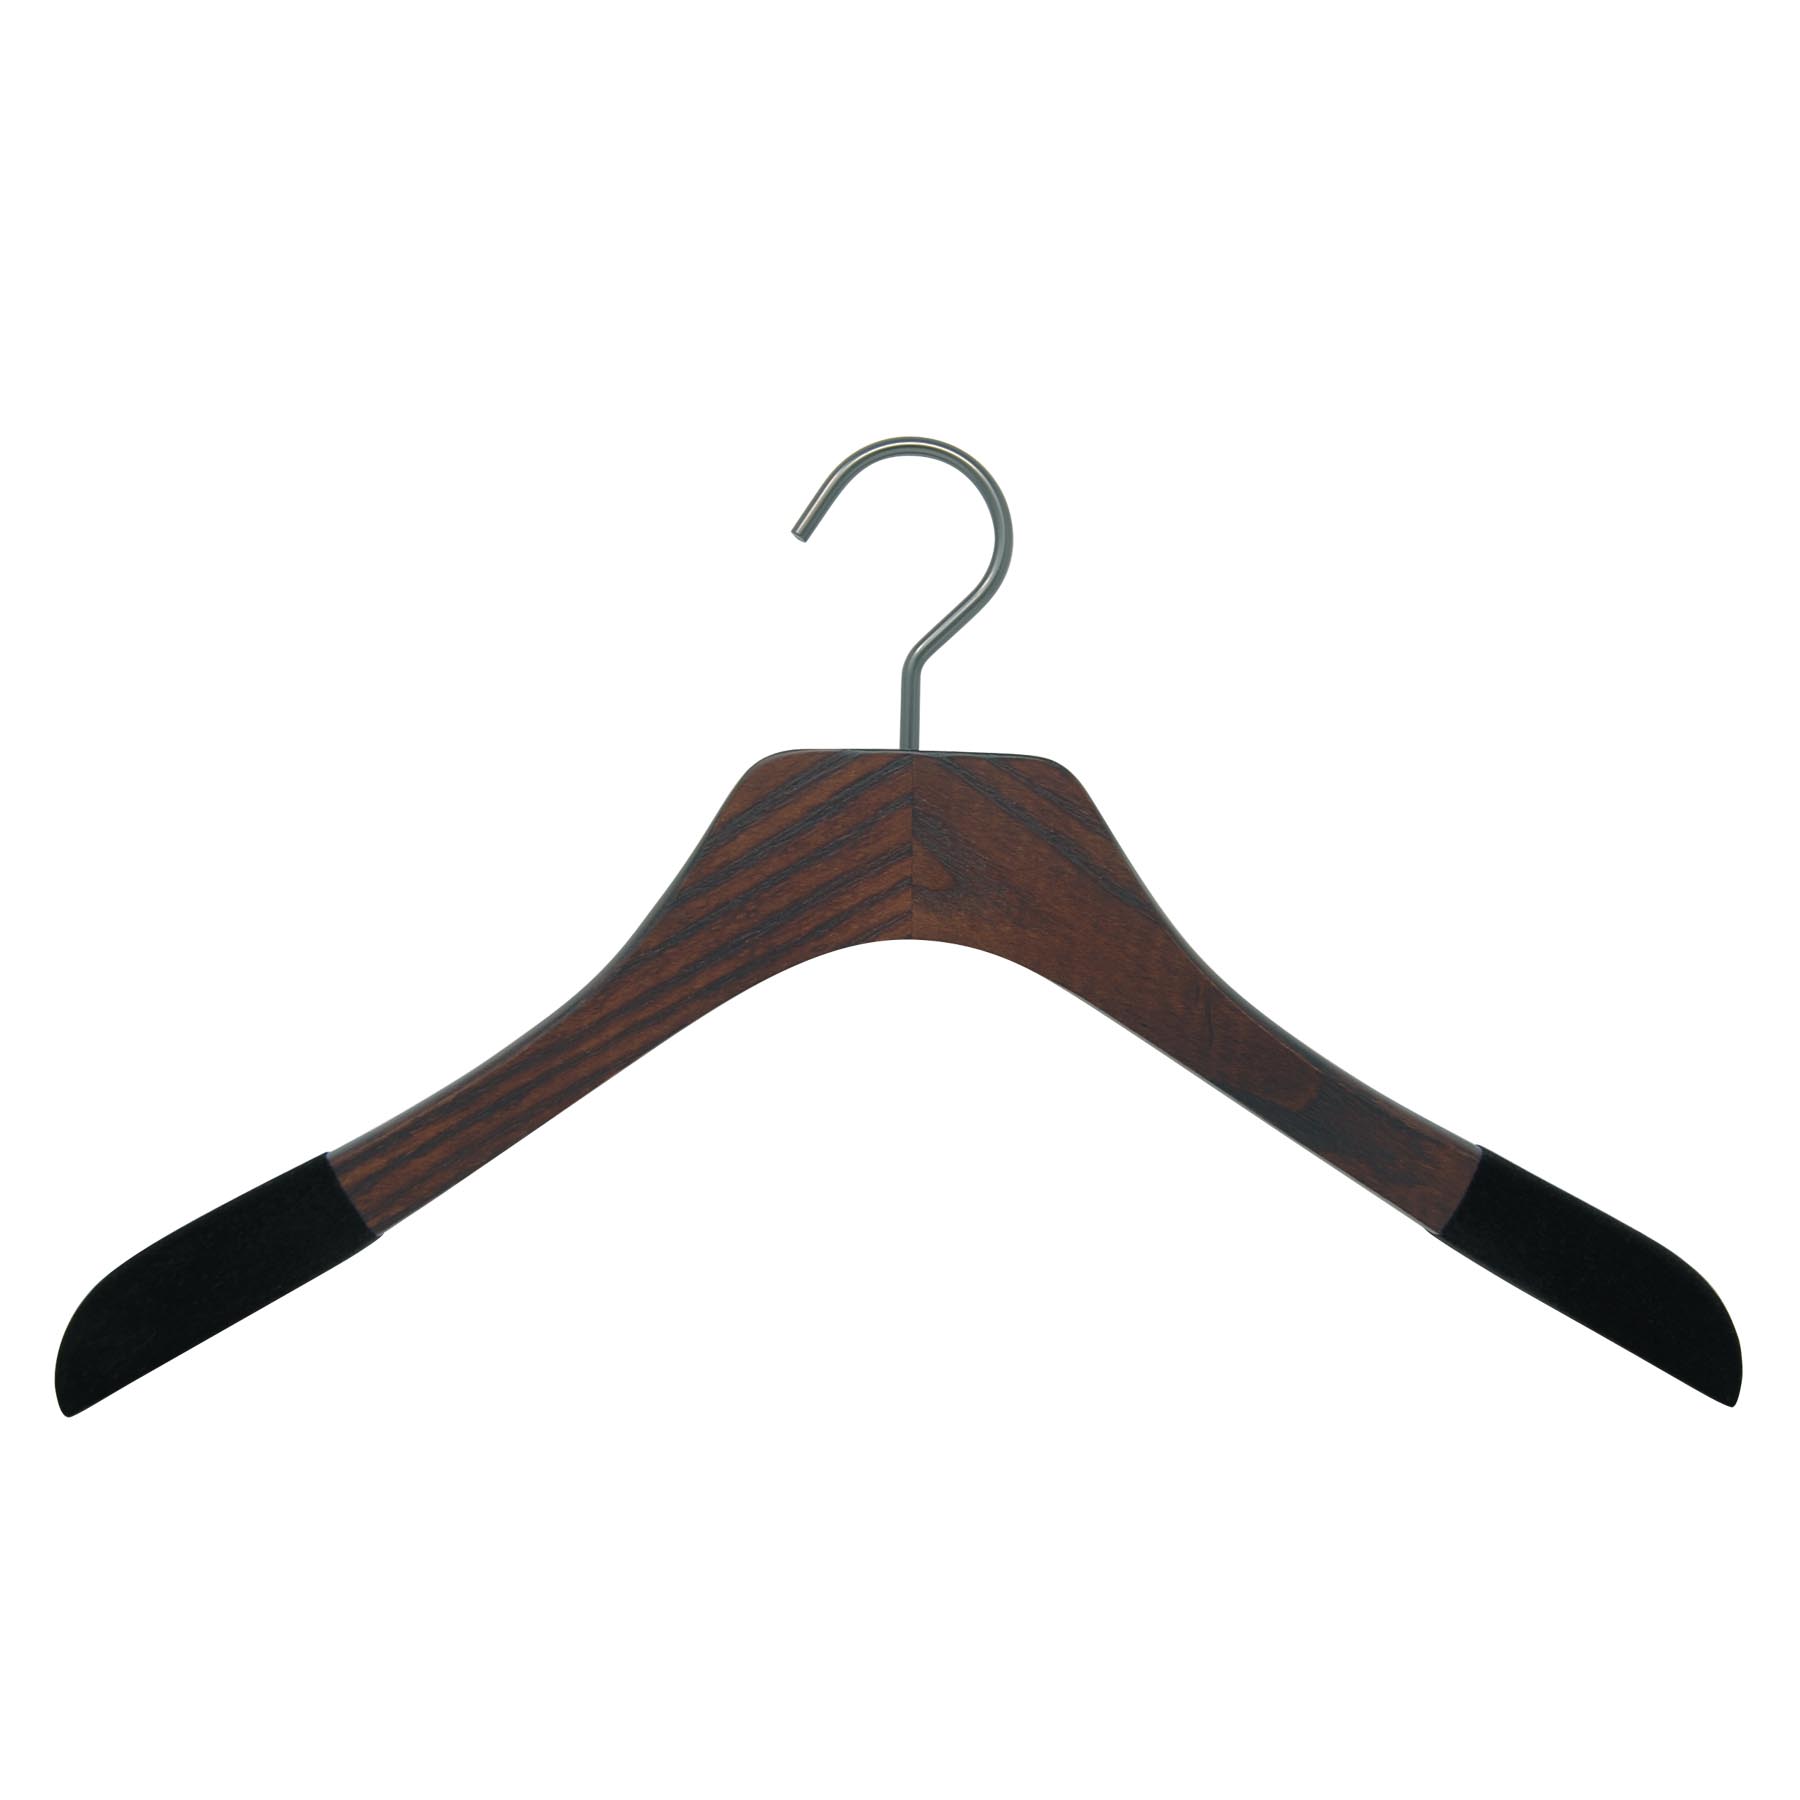 15 thin hangers for shirt, in ash wood - walnut color